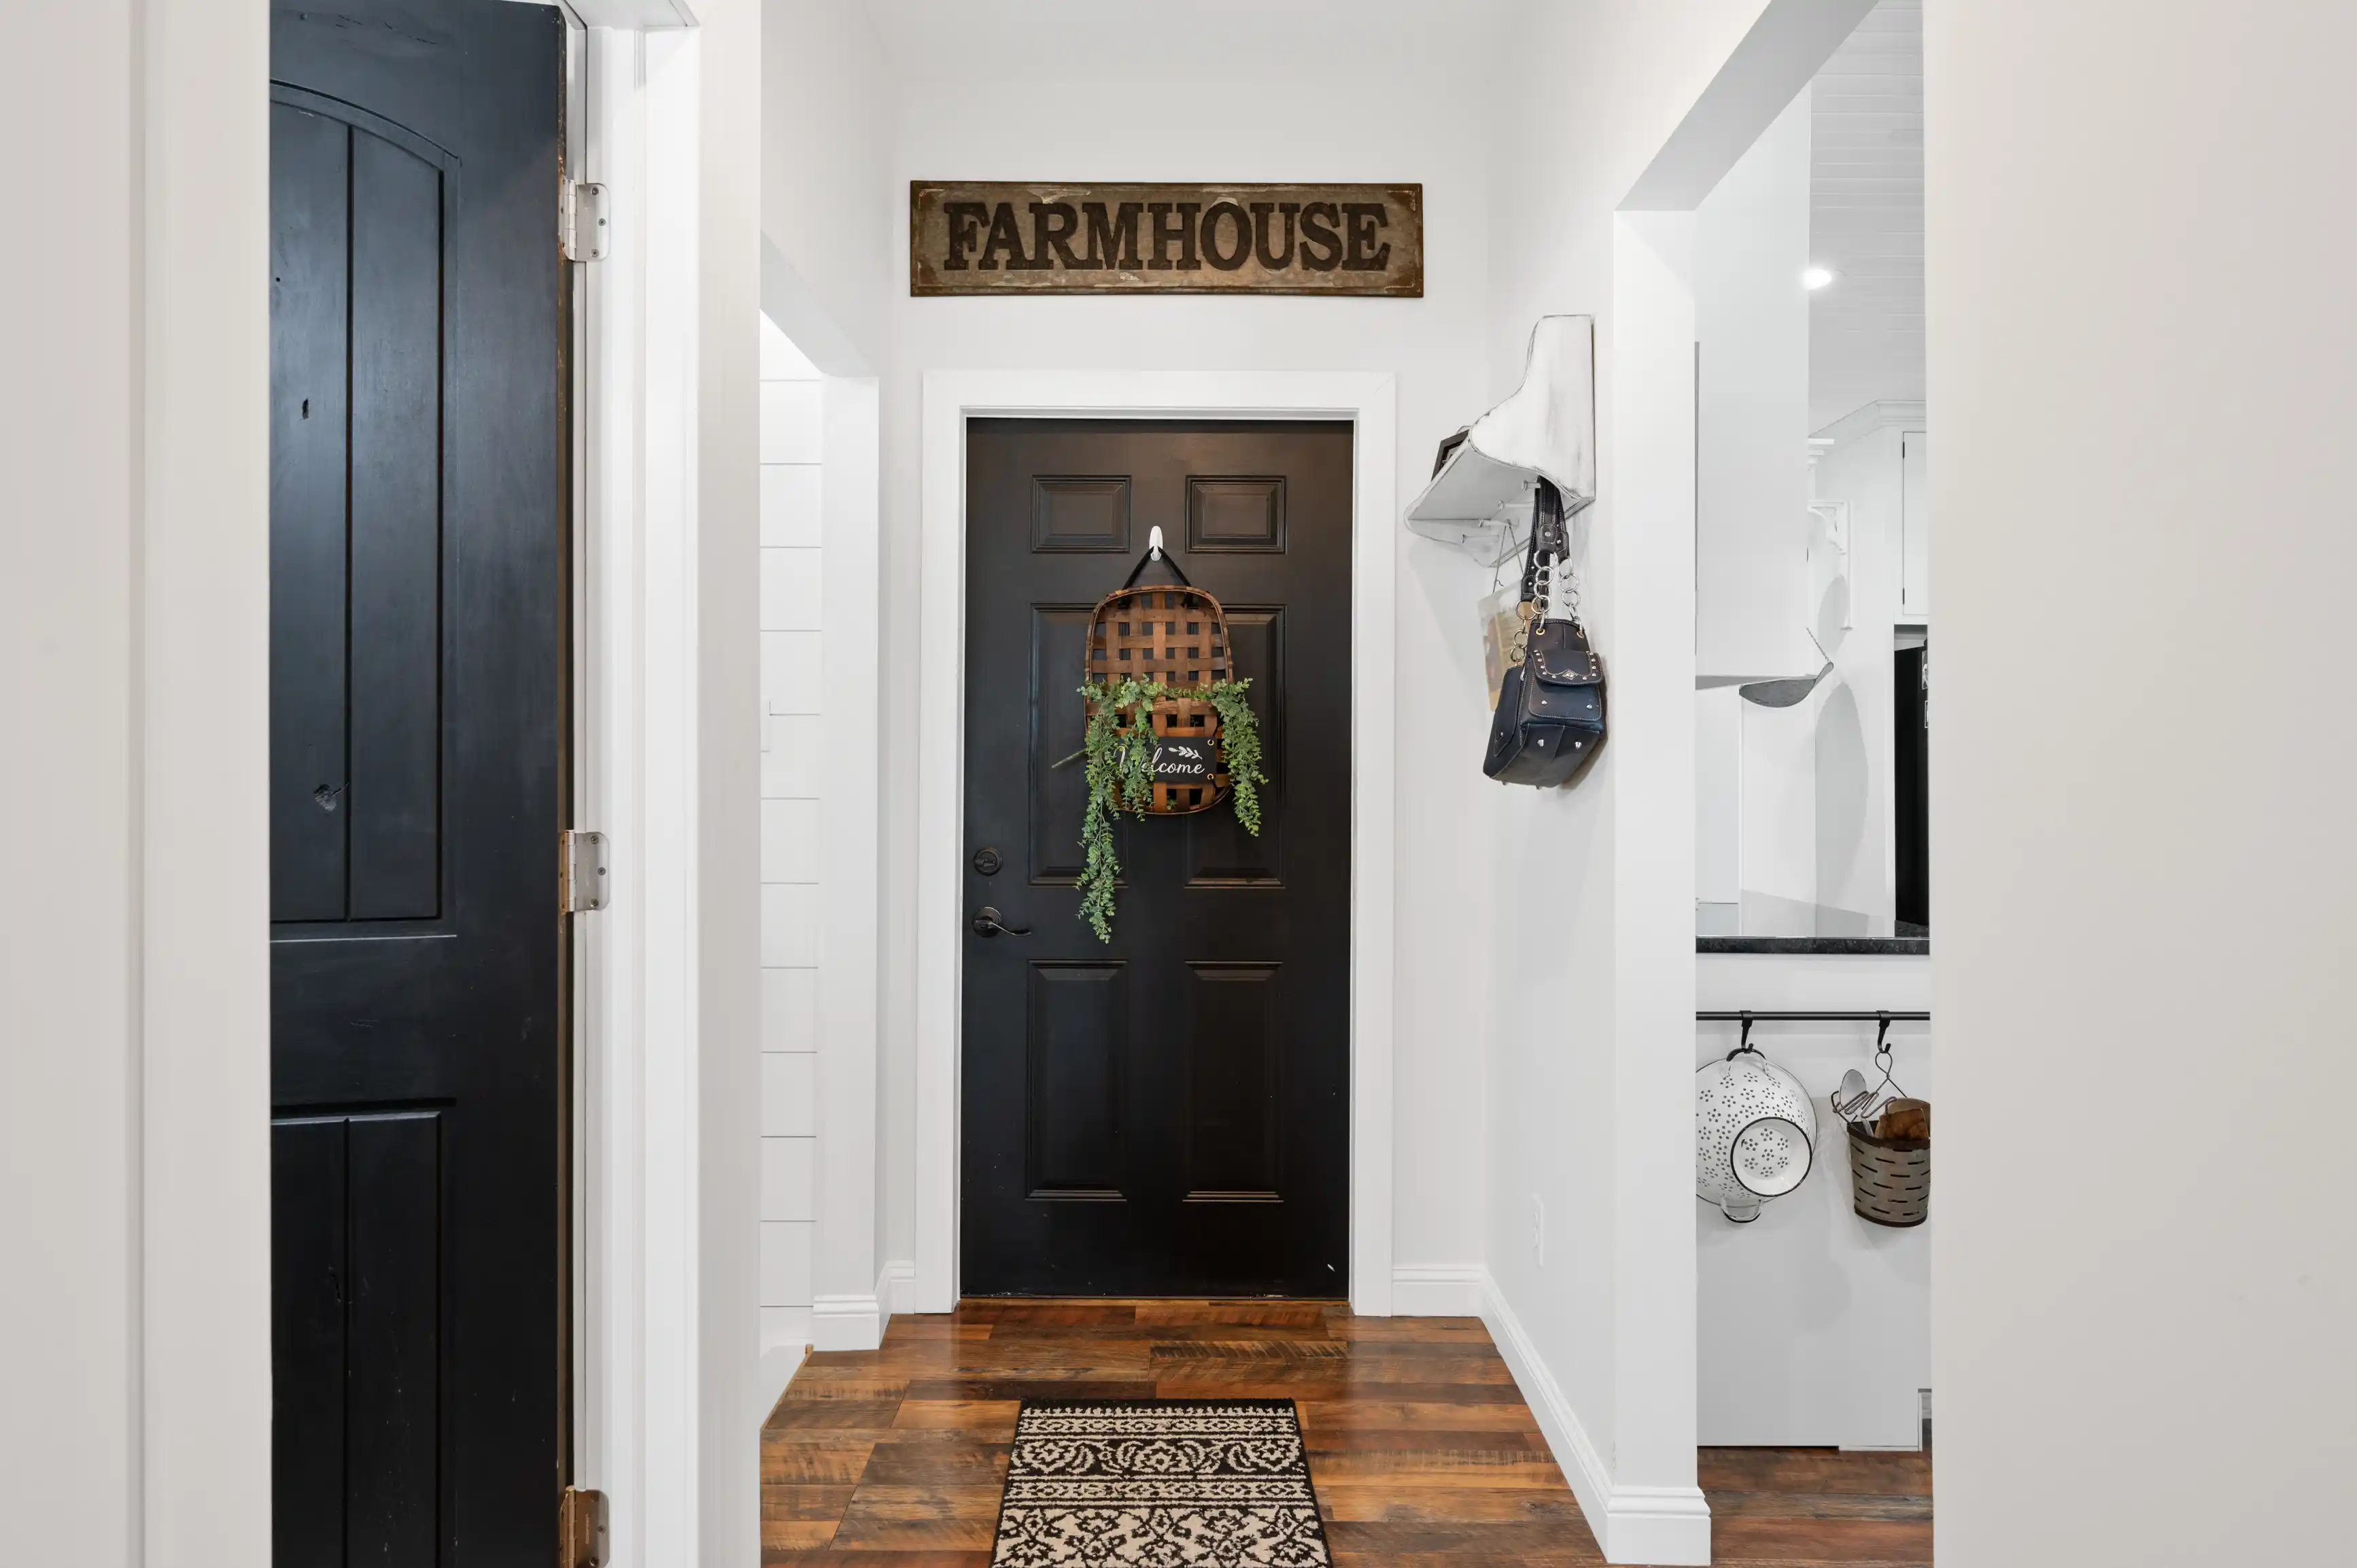 Modern farmhouse style hallway with a decorative "FARMHOUSE" sign, black front door adorned with a welcome basket and greenery, patterned rug on wooden floor, and hanging accessories on white walls.